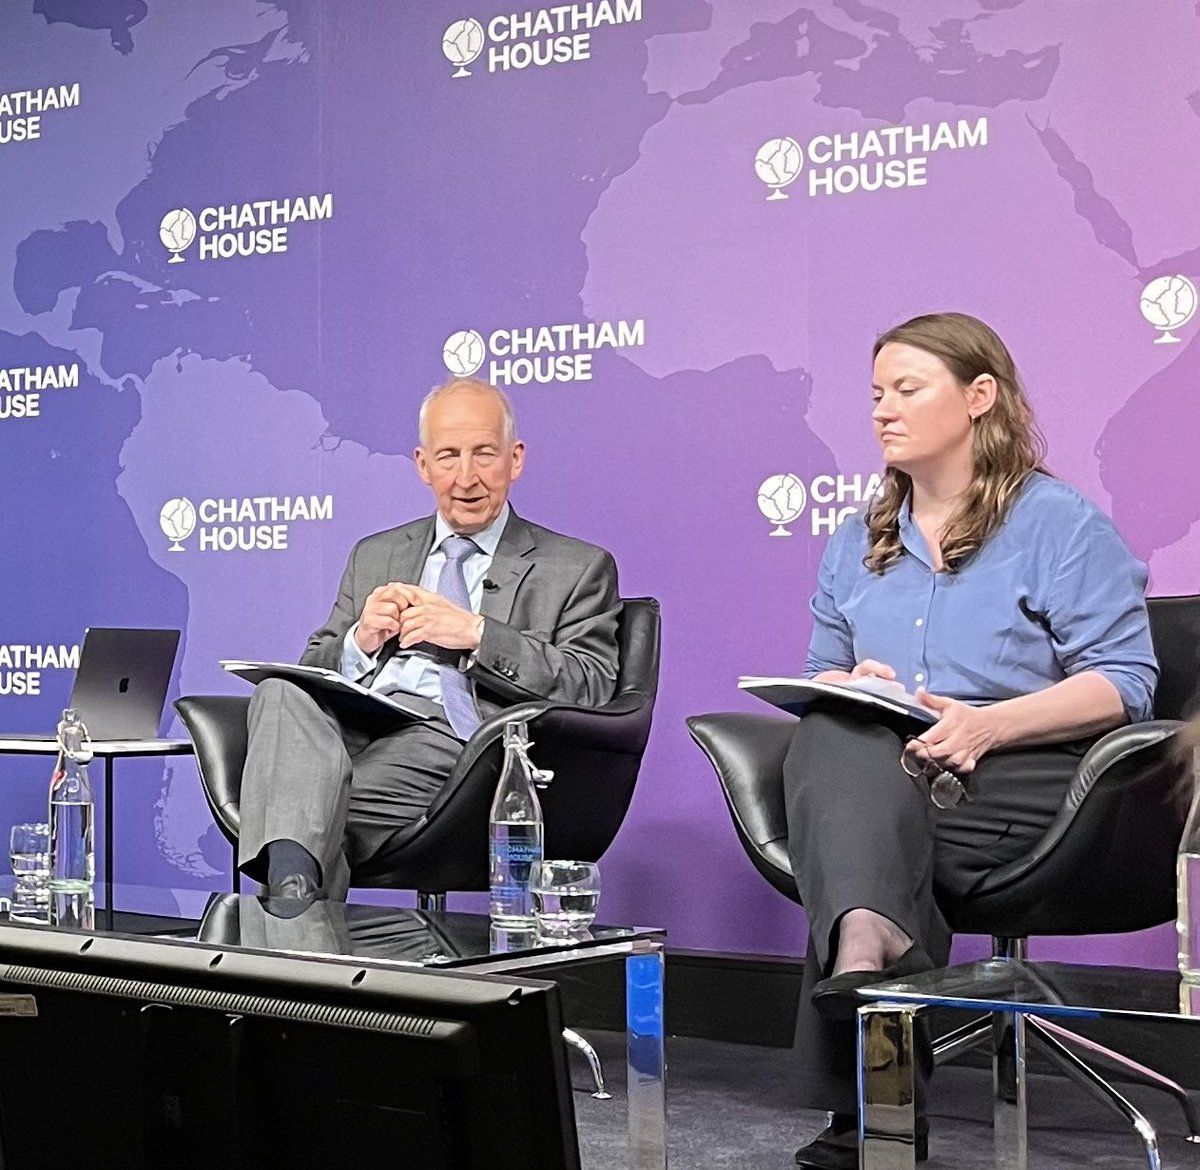 - Rebuild trust with friends & allies; - Under-promise and over-deliver. - Find the right forum to leverage UK foreign policy (G7 too small, NATO too transatlantic). - Set 5-year goals and burden-share. @LordRickettsP ideas on UK foreign policy @ChathamHouse